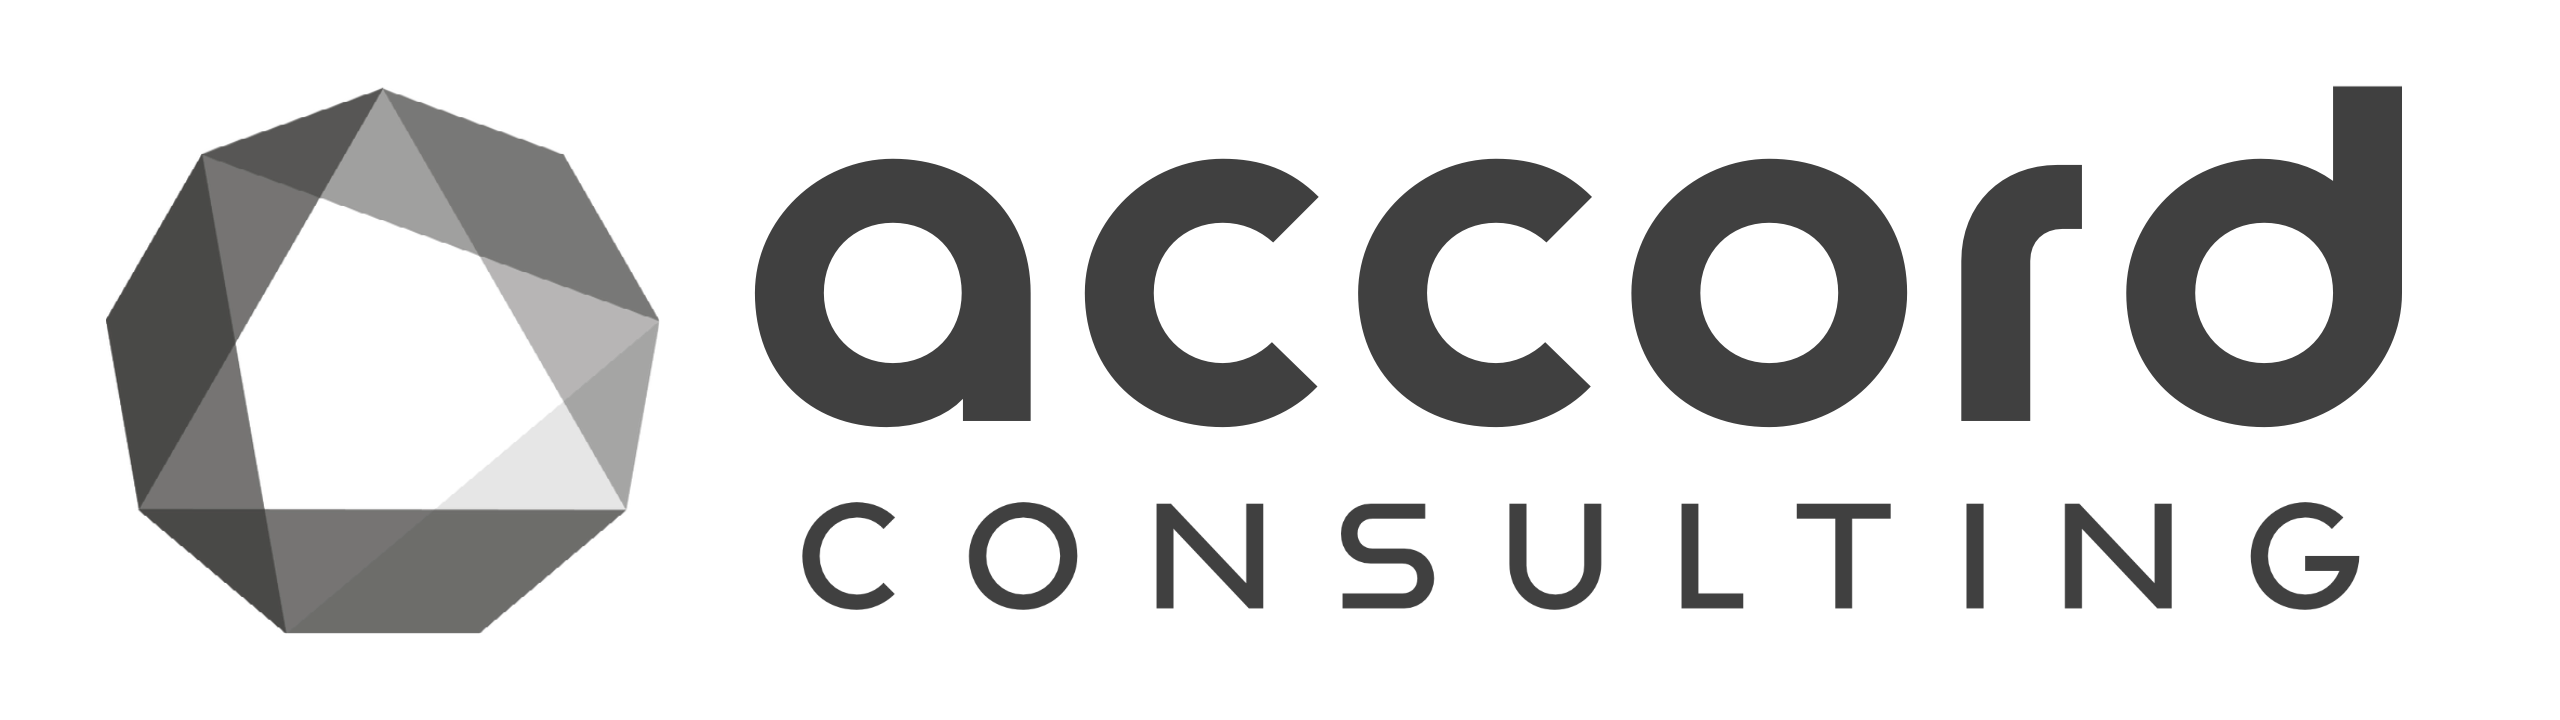 Accord Consulting